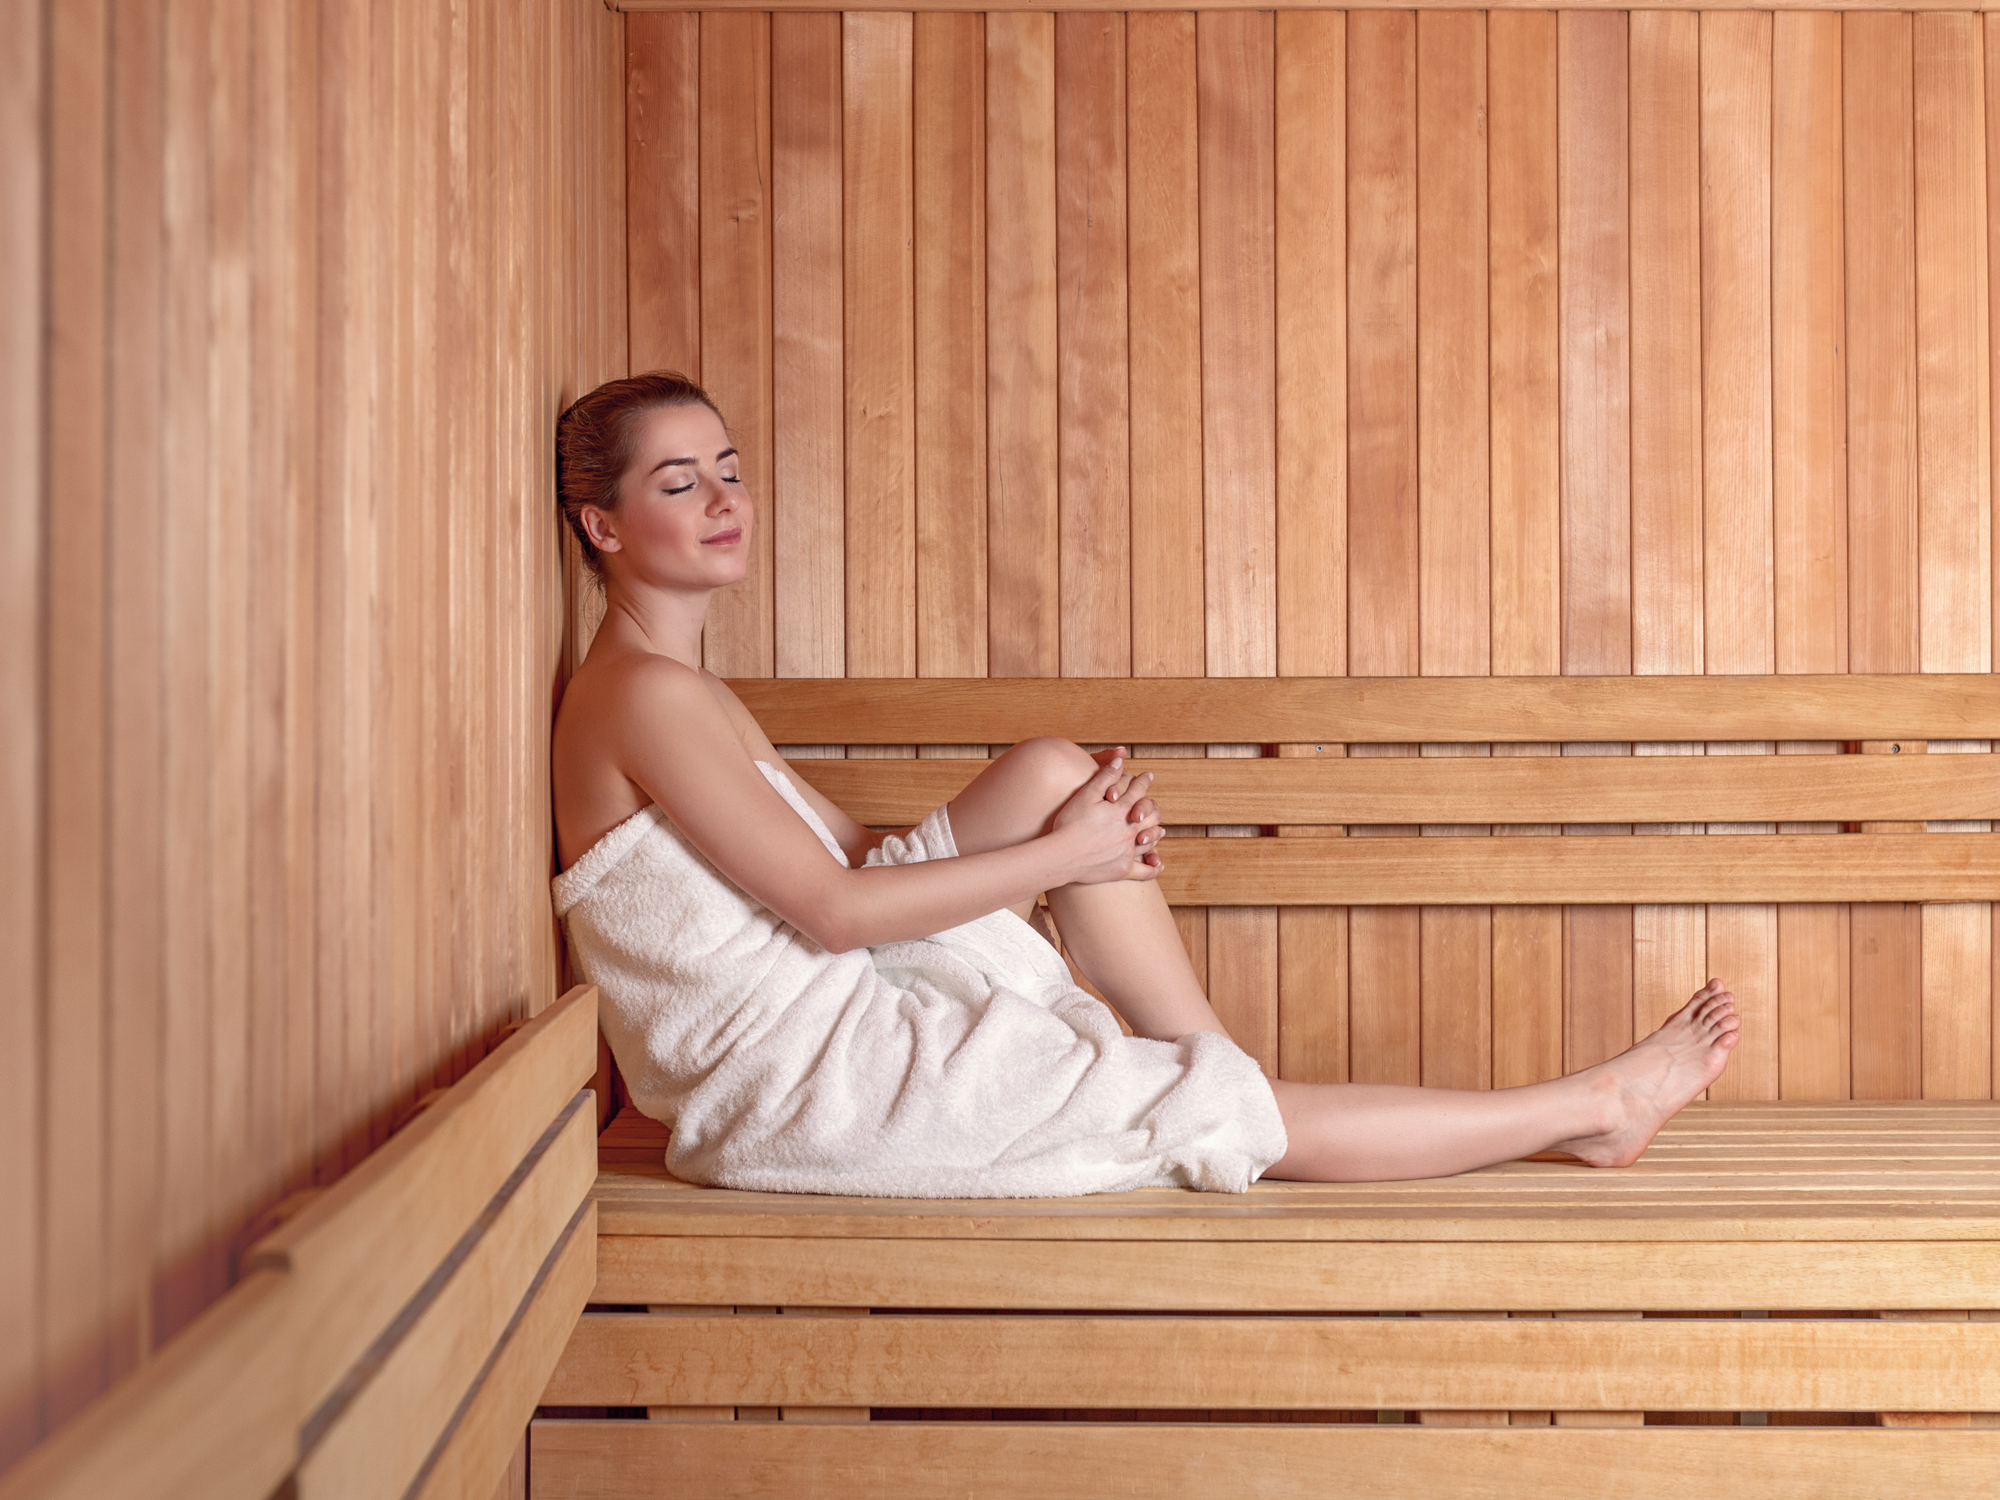 Dodge Diseases With Sauna Sessions Easy Health Options